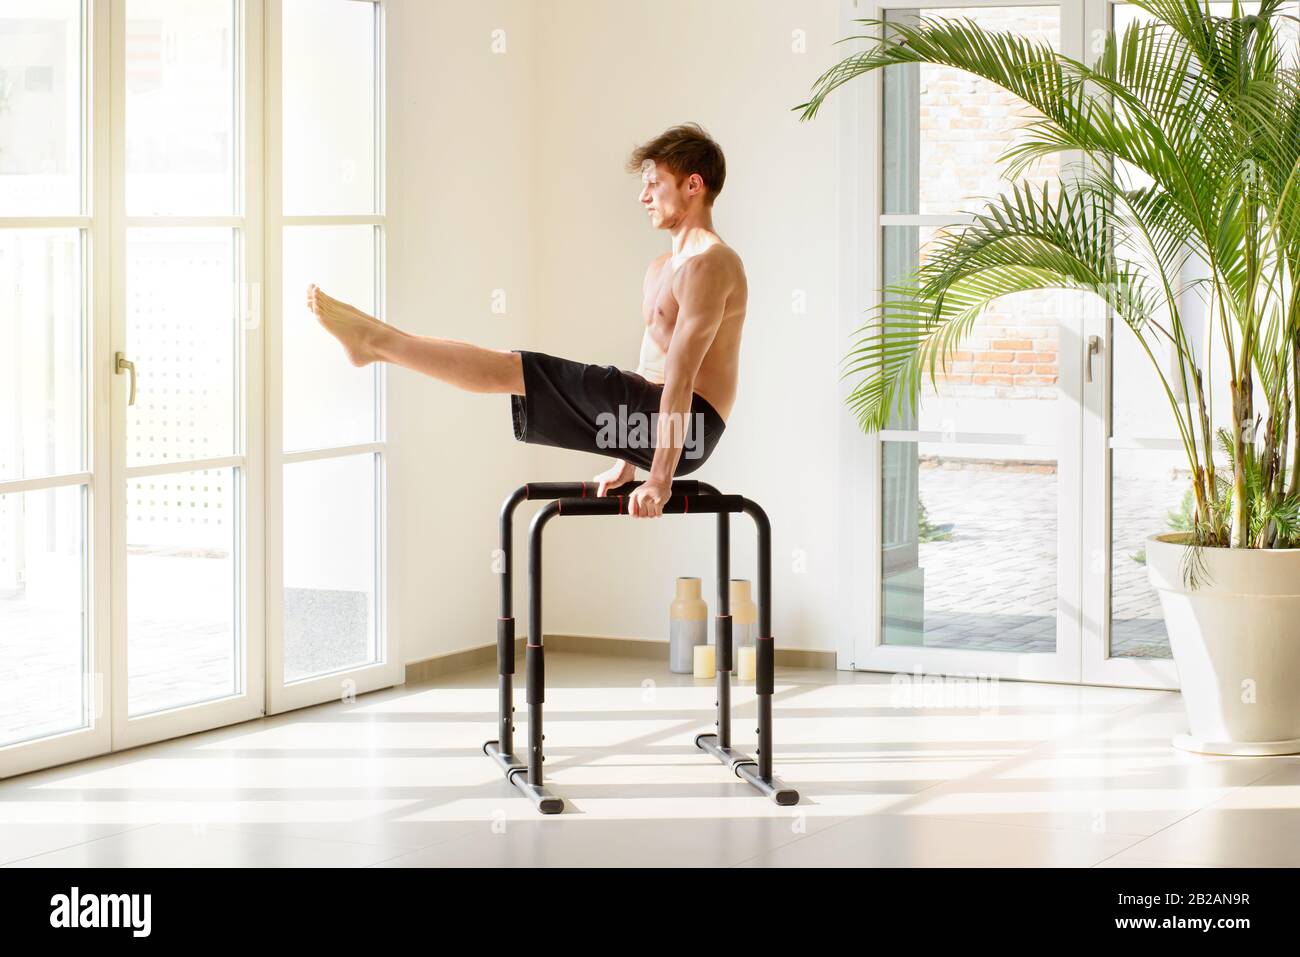 Fit young man working out on parallel bars doing V sit exercises during a calisthenics workout in a modern high key gym in a health and fitness concep Stock Photo